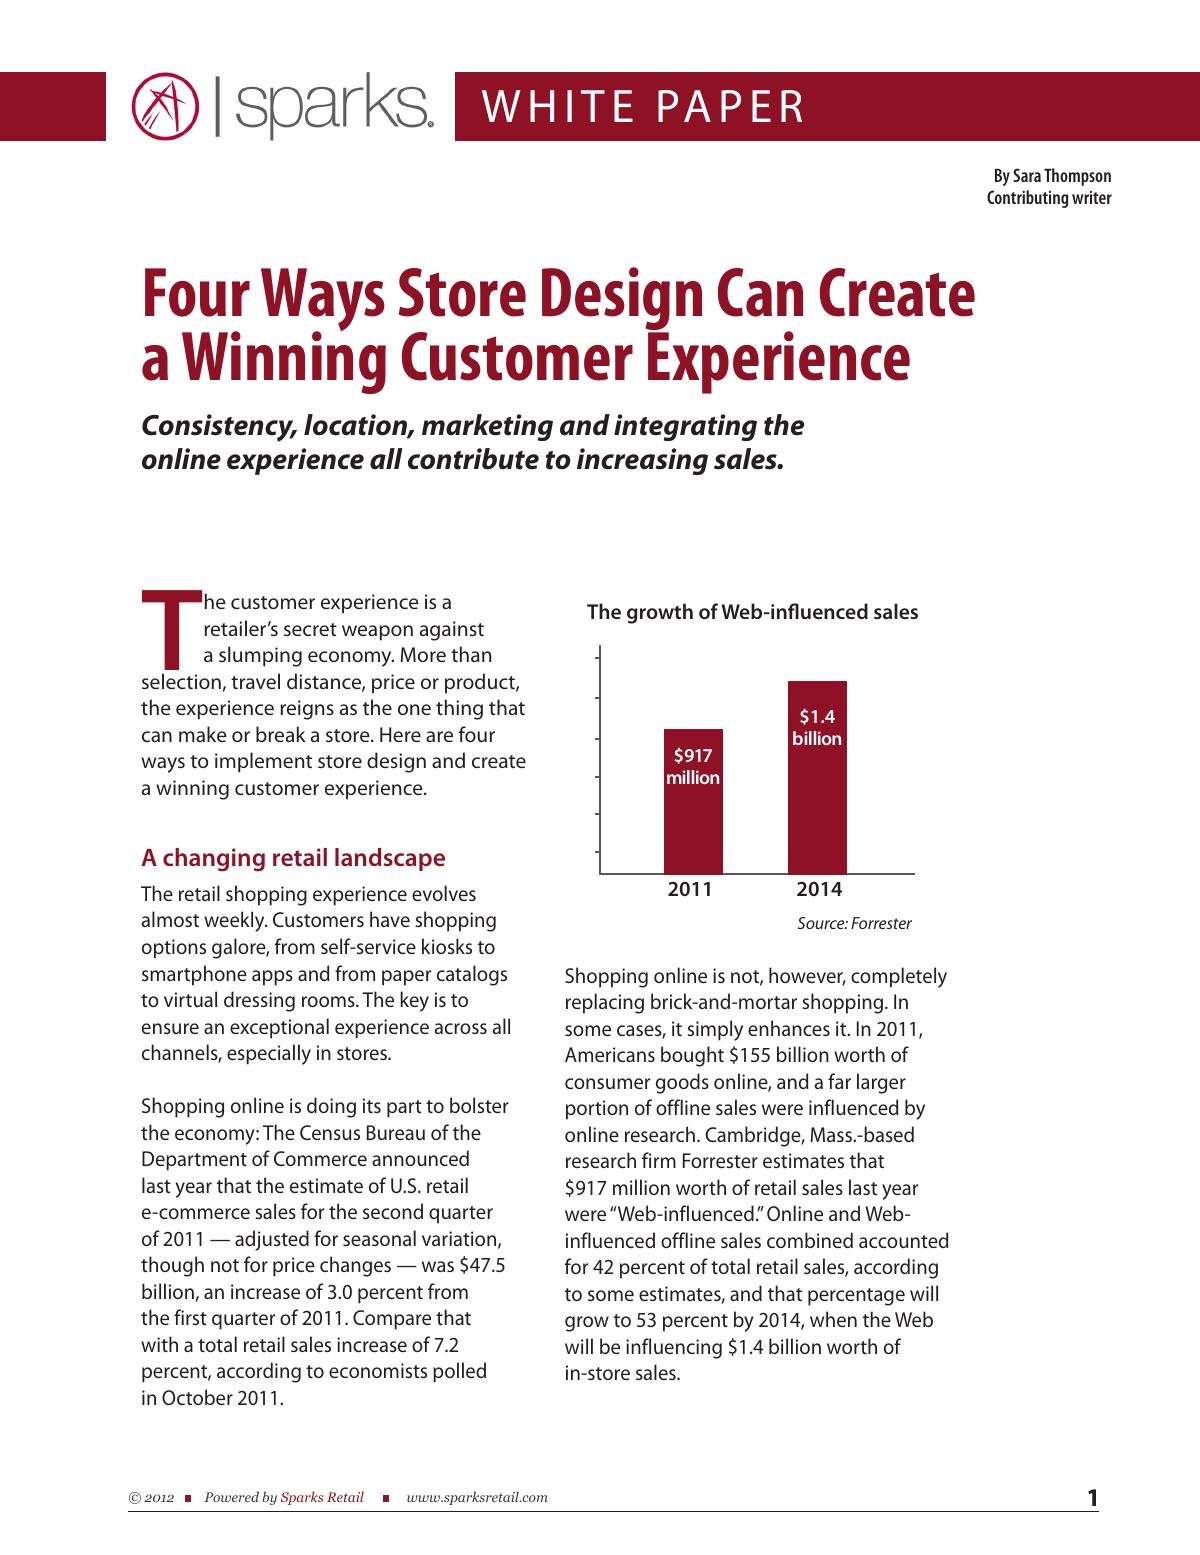 Four Ways Store Design Can Create a Winning Customer Experience